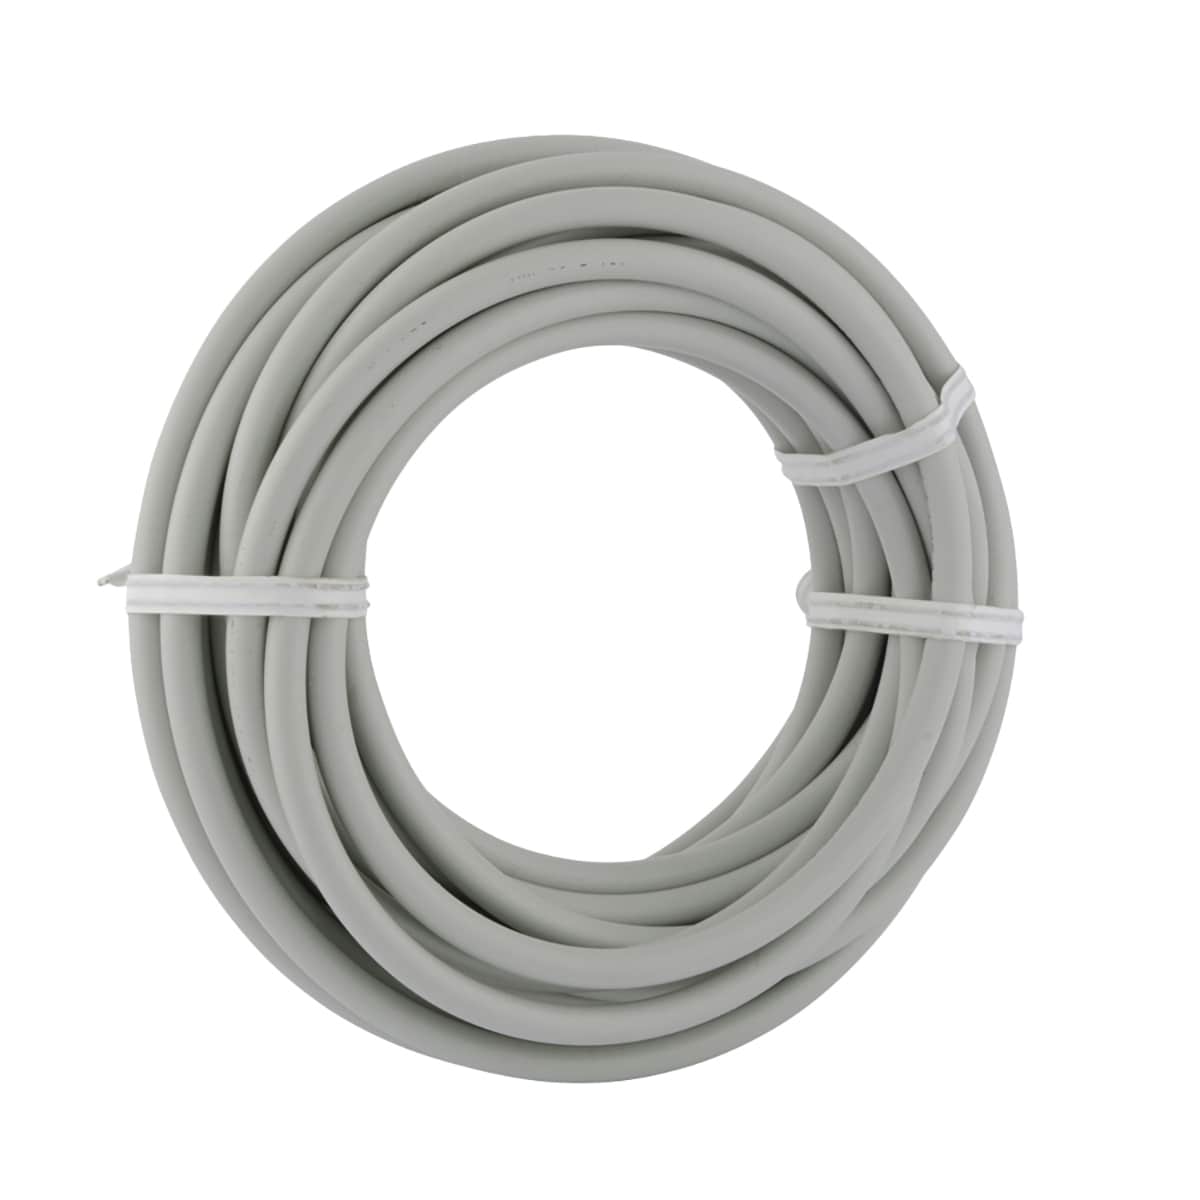 PEX Refrigerator Water Line Kit - 25FT Ice Maker Tubing with Add-A-Tee  Adapter，Flexible Hose with 1/4 Compression Fittings for Potable Drinking  Water